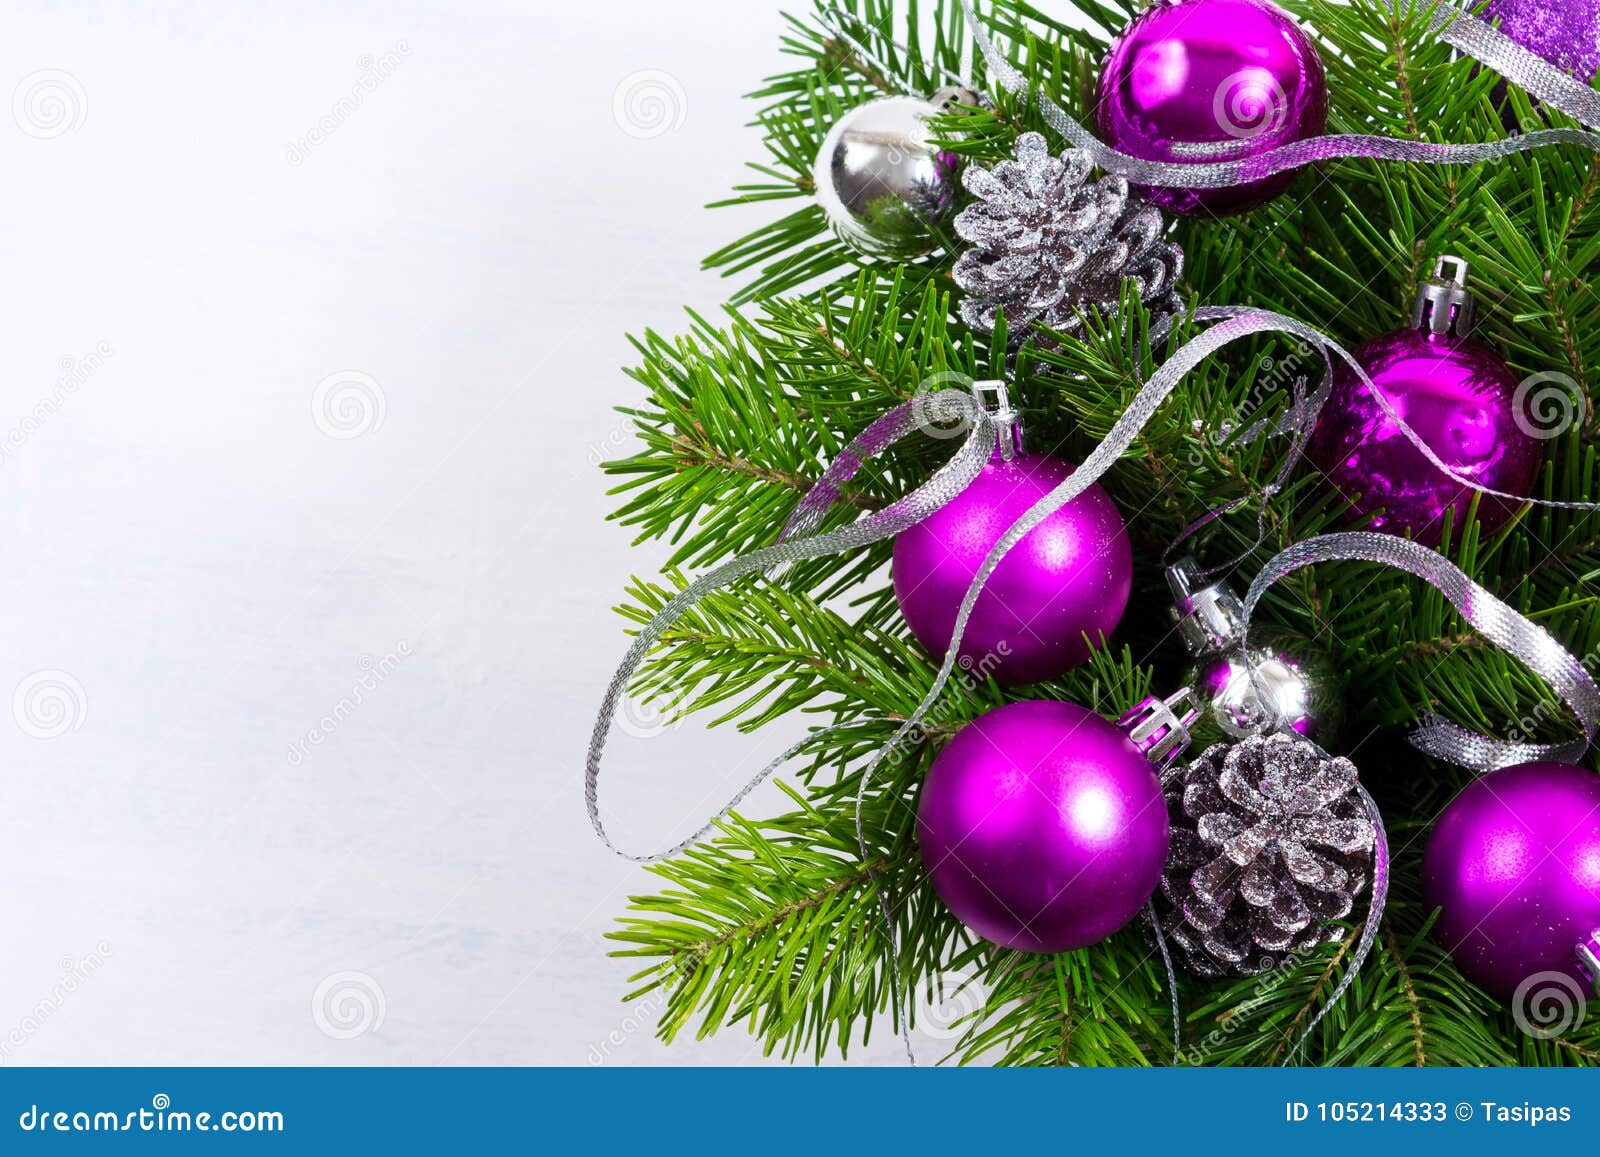 Christmas Background with Purple Ornament, Copy Space. Stock Image ...